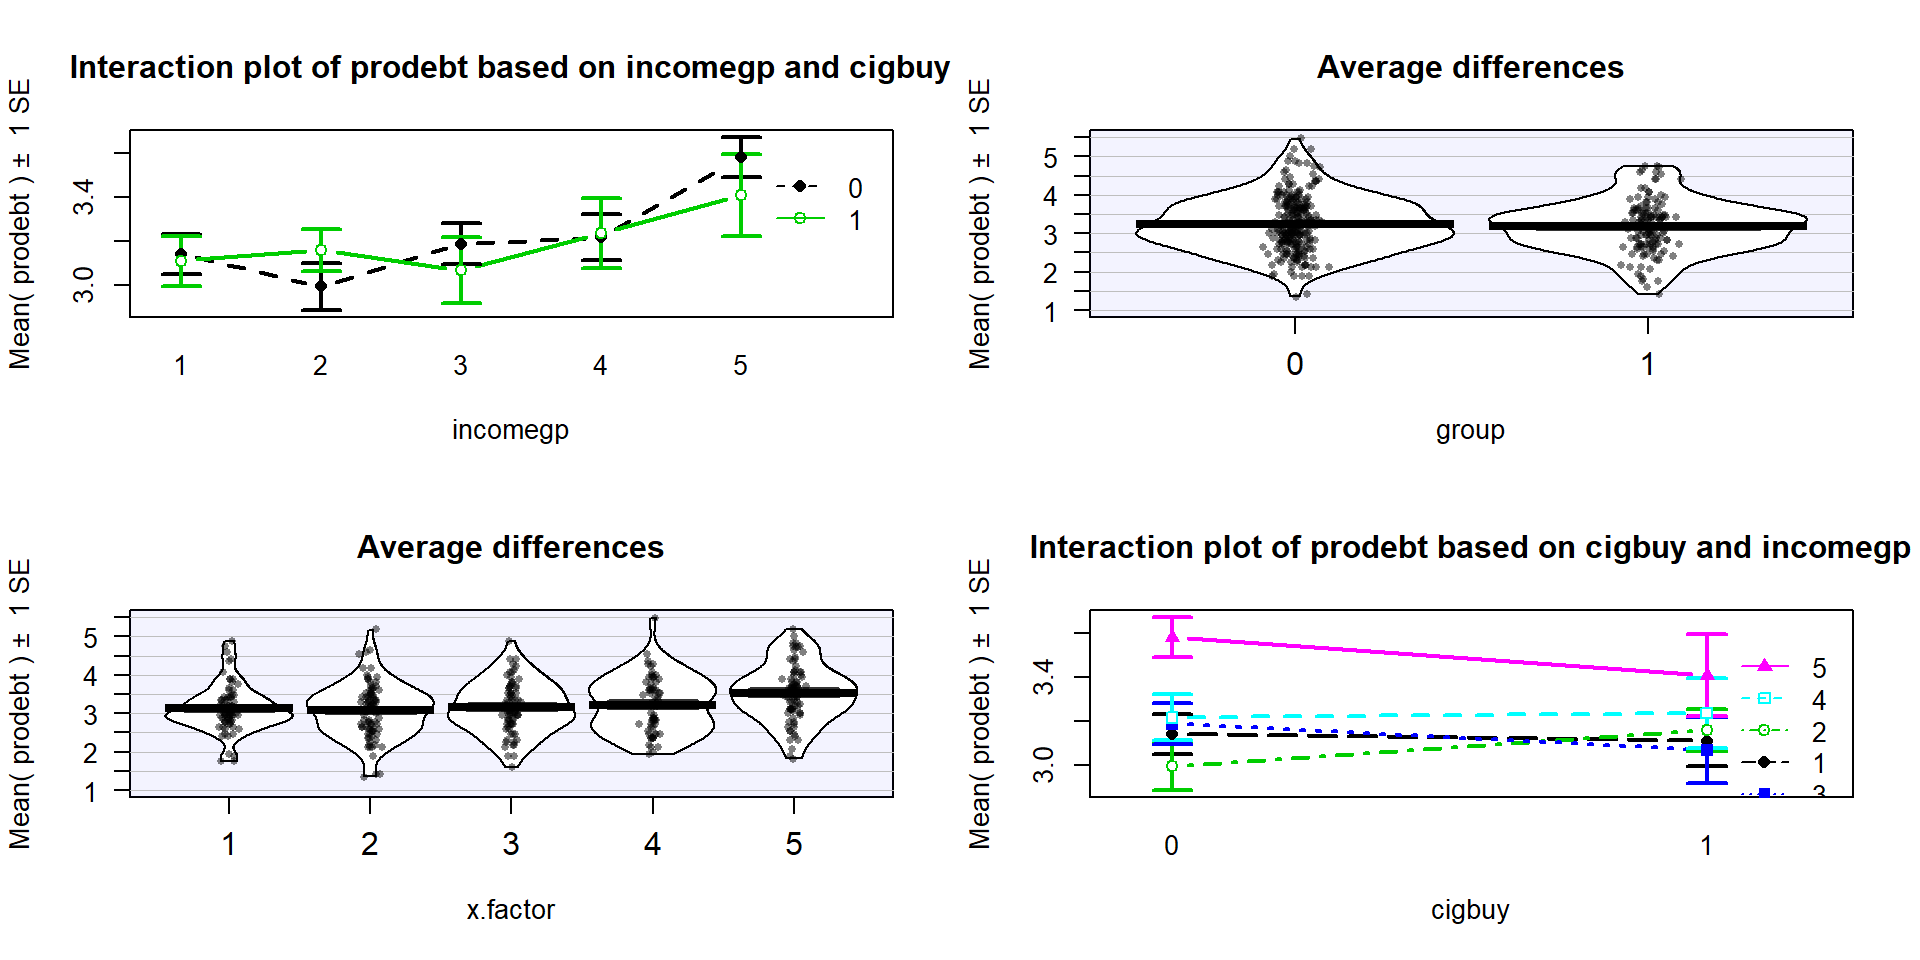 Interaction plot array of prodebt by income group (1 to 5) and whether they buy cigarettes (0=no, 1=yes).